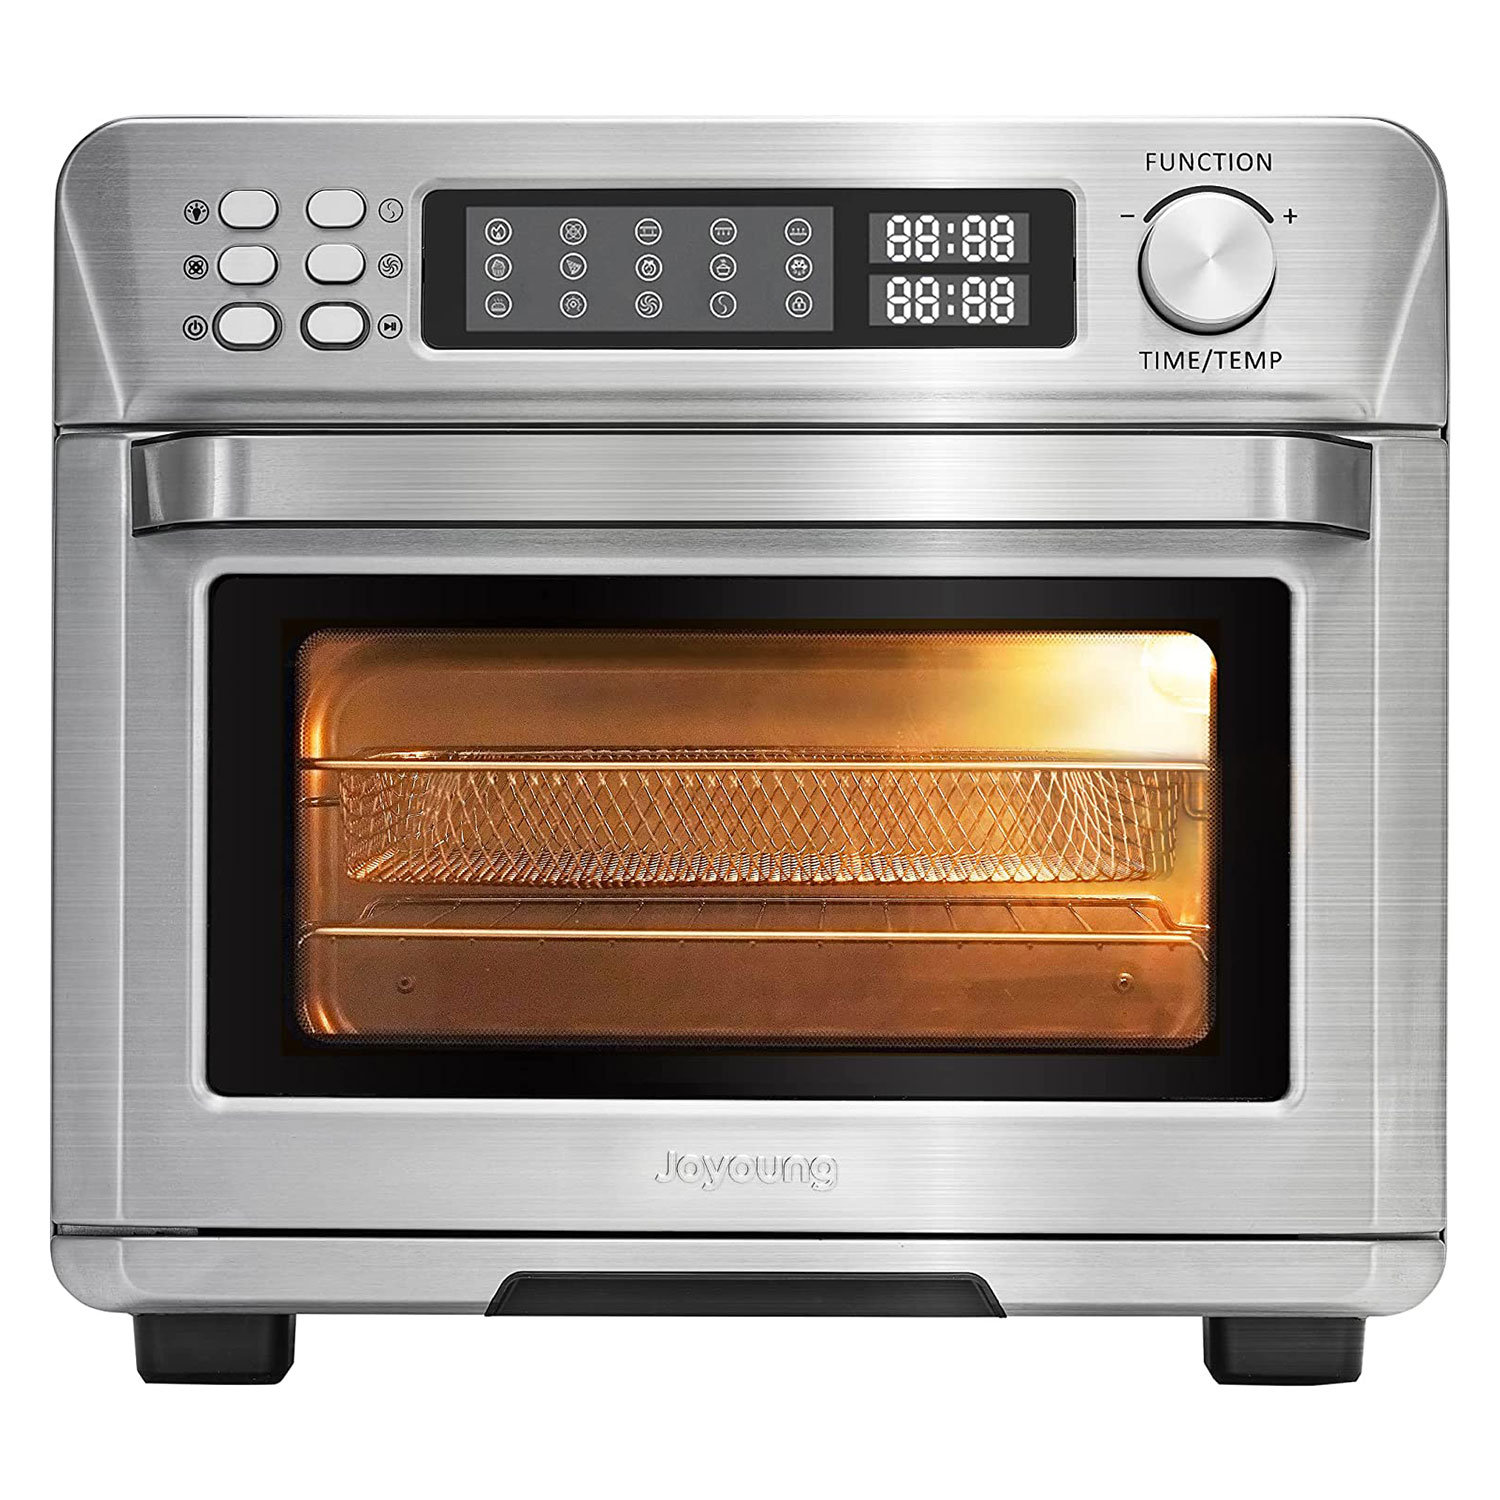 Toaster Oven Air Fryer Combo,10-in-1,10 Touch Screen Presets,25QT